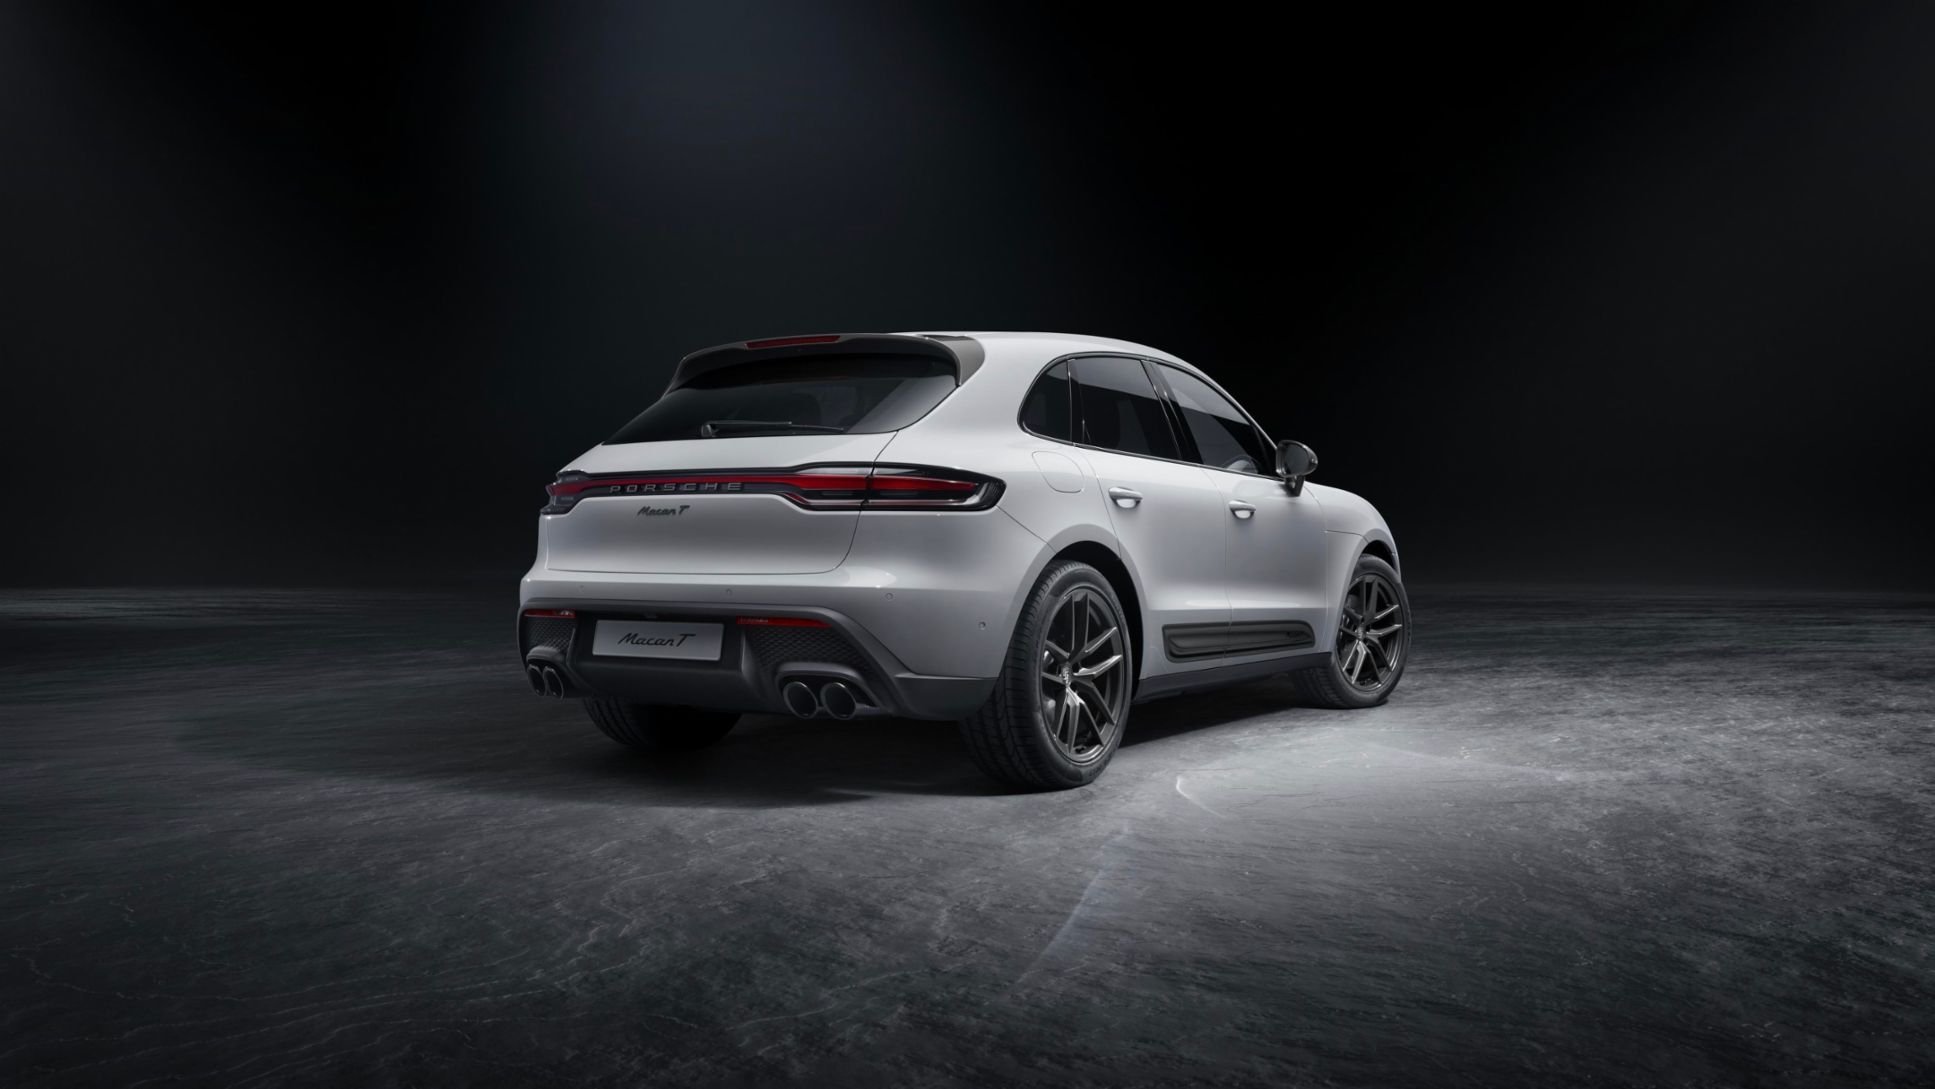 Agile and exclusive: Porsche presents the first Macan T - Porsche Newsroom